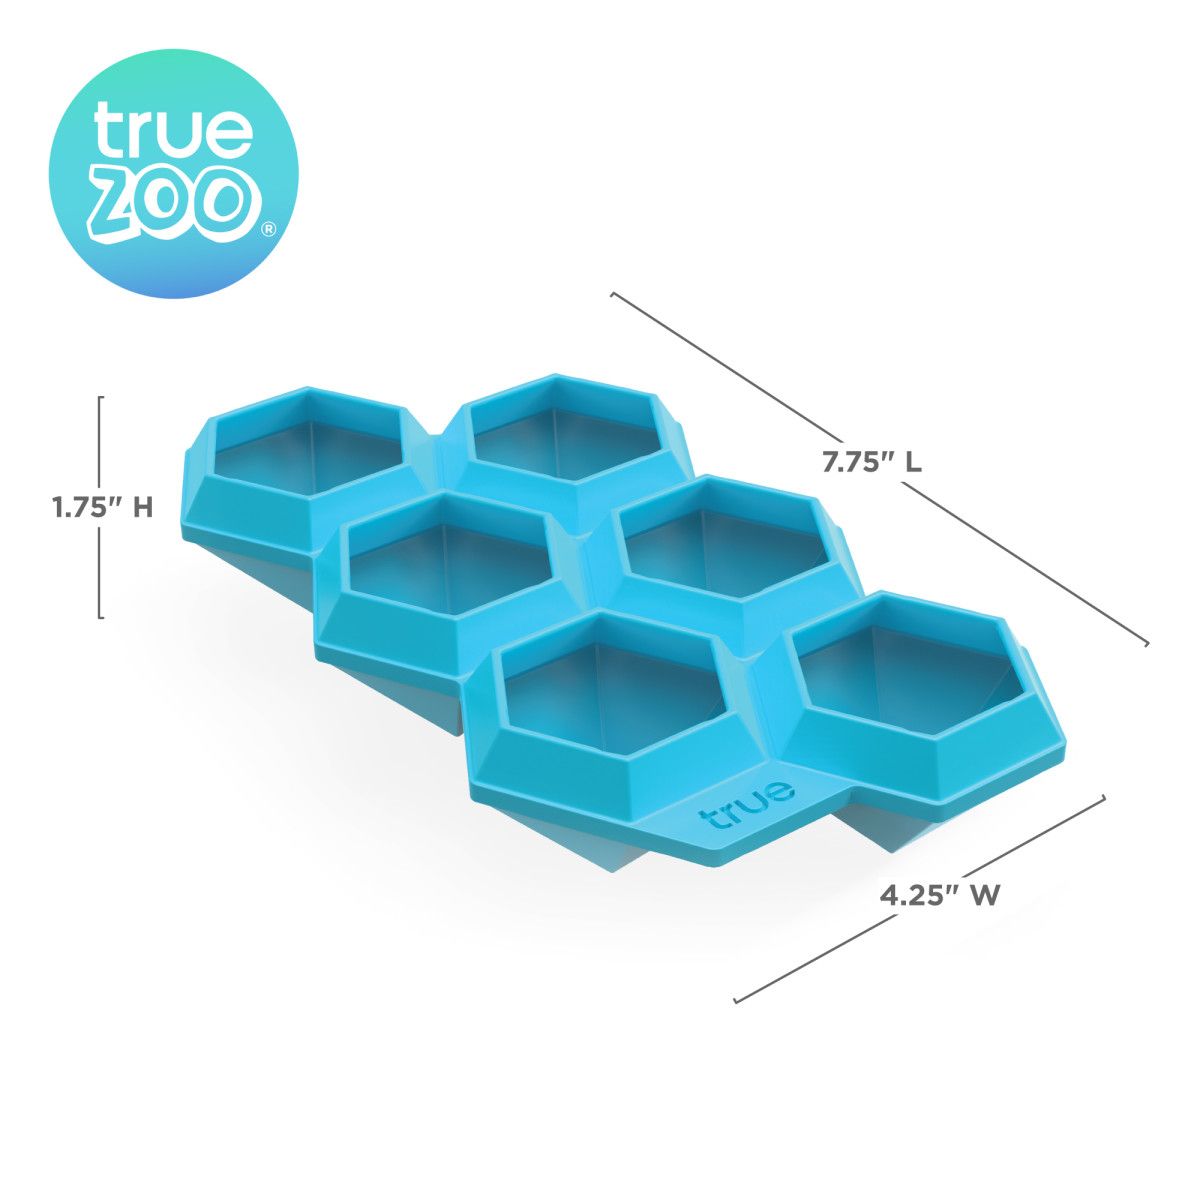 True Zoo Diamond Silicone Mold and Ice Cube Tray for Whiskey, Bath